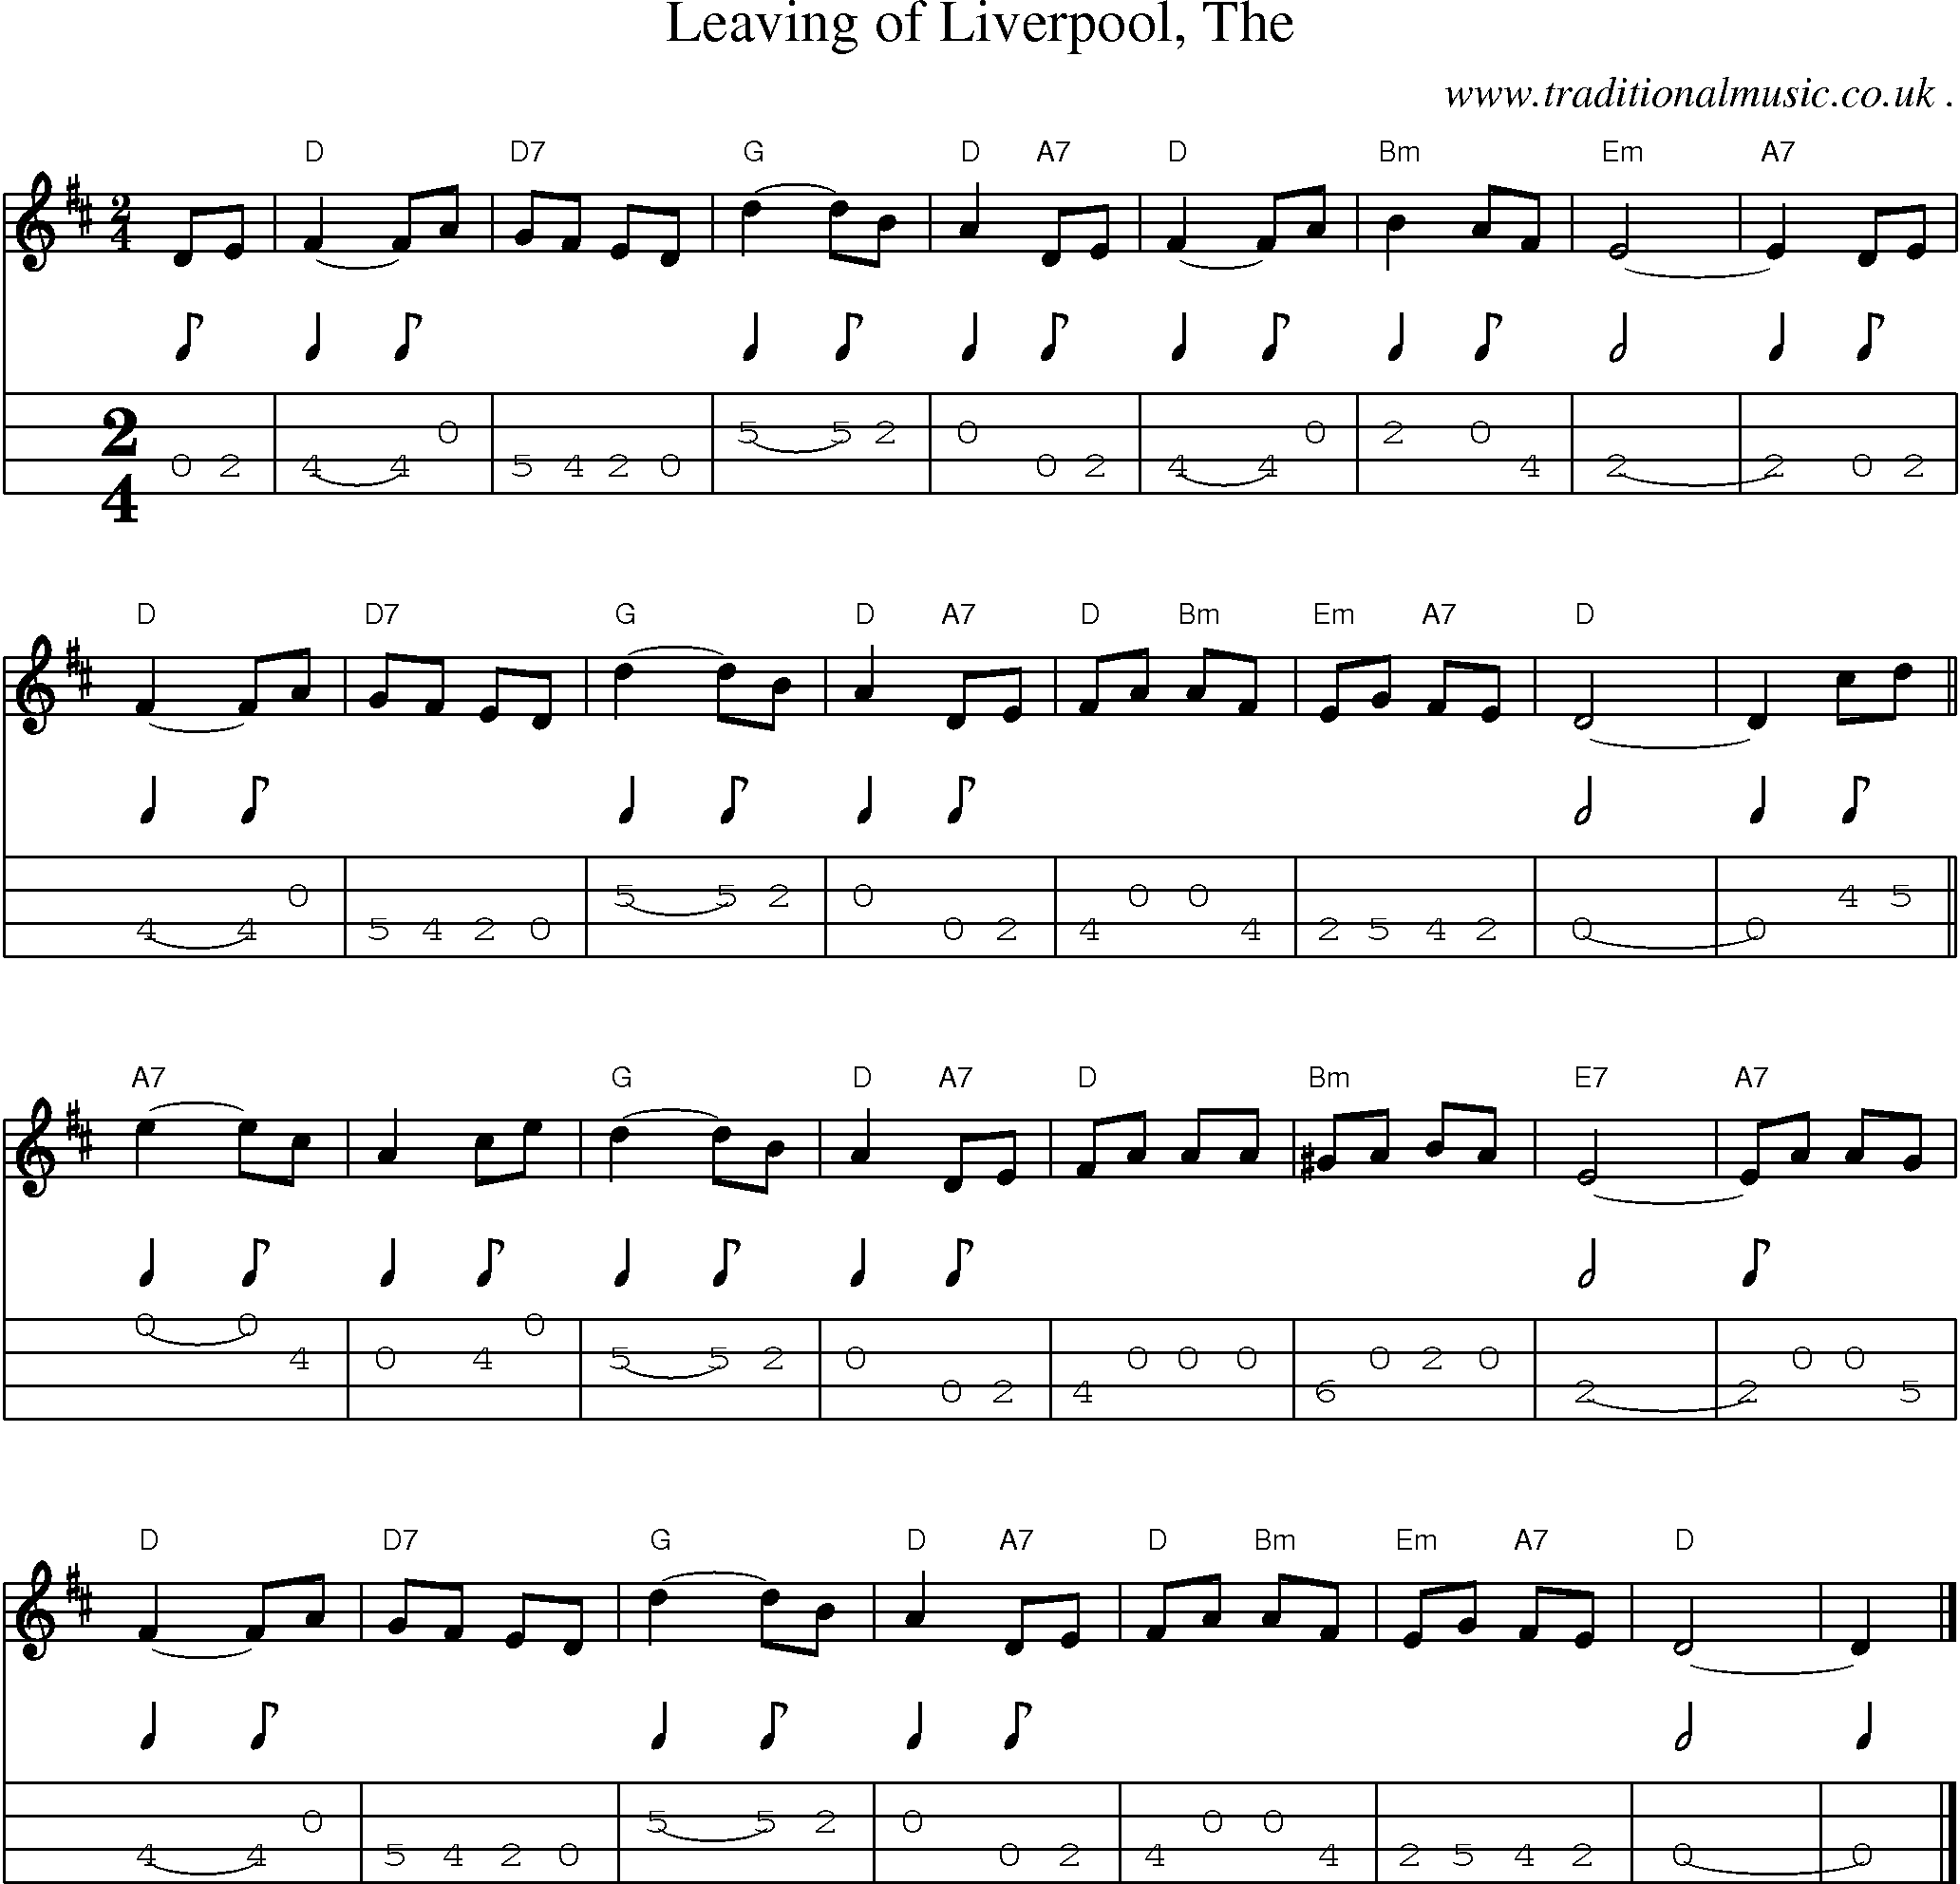 Music Score and Guitar Tabs for Leaving of Liverpool The